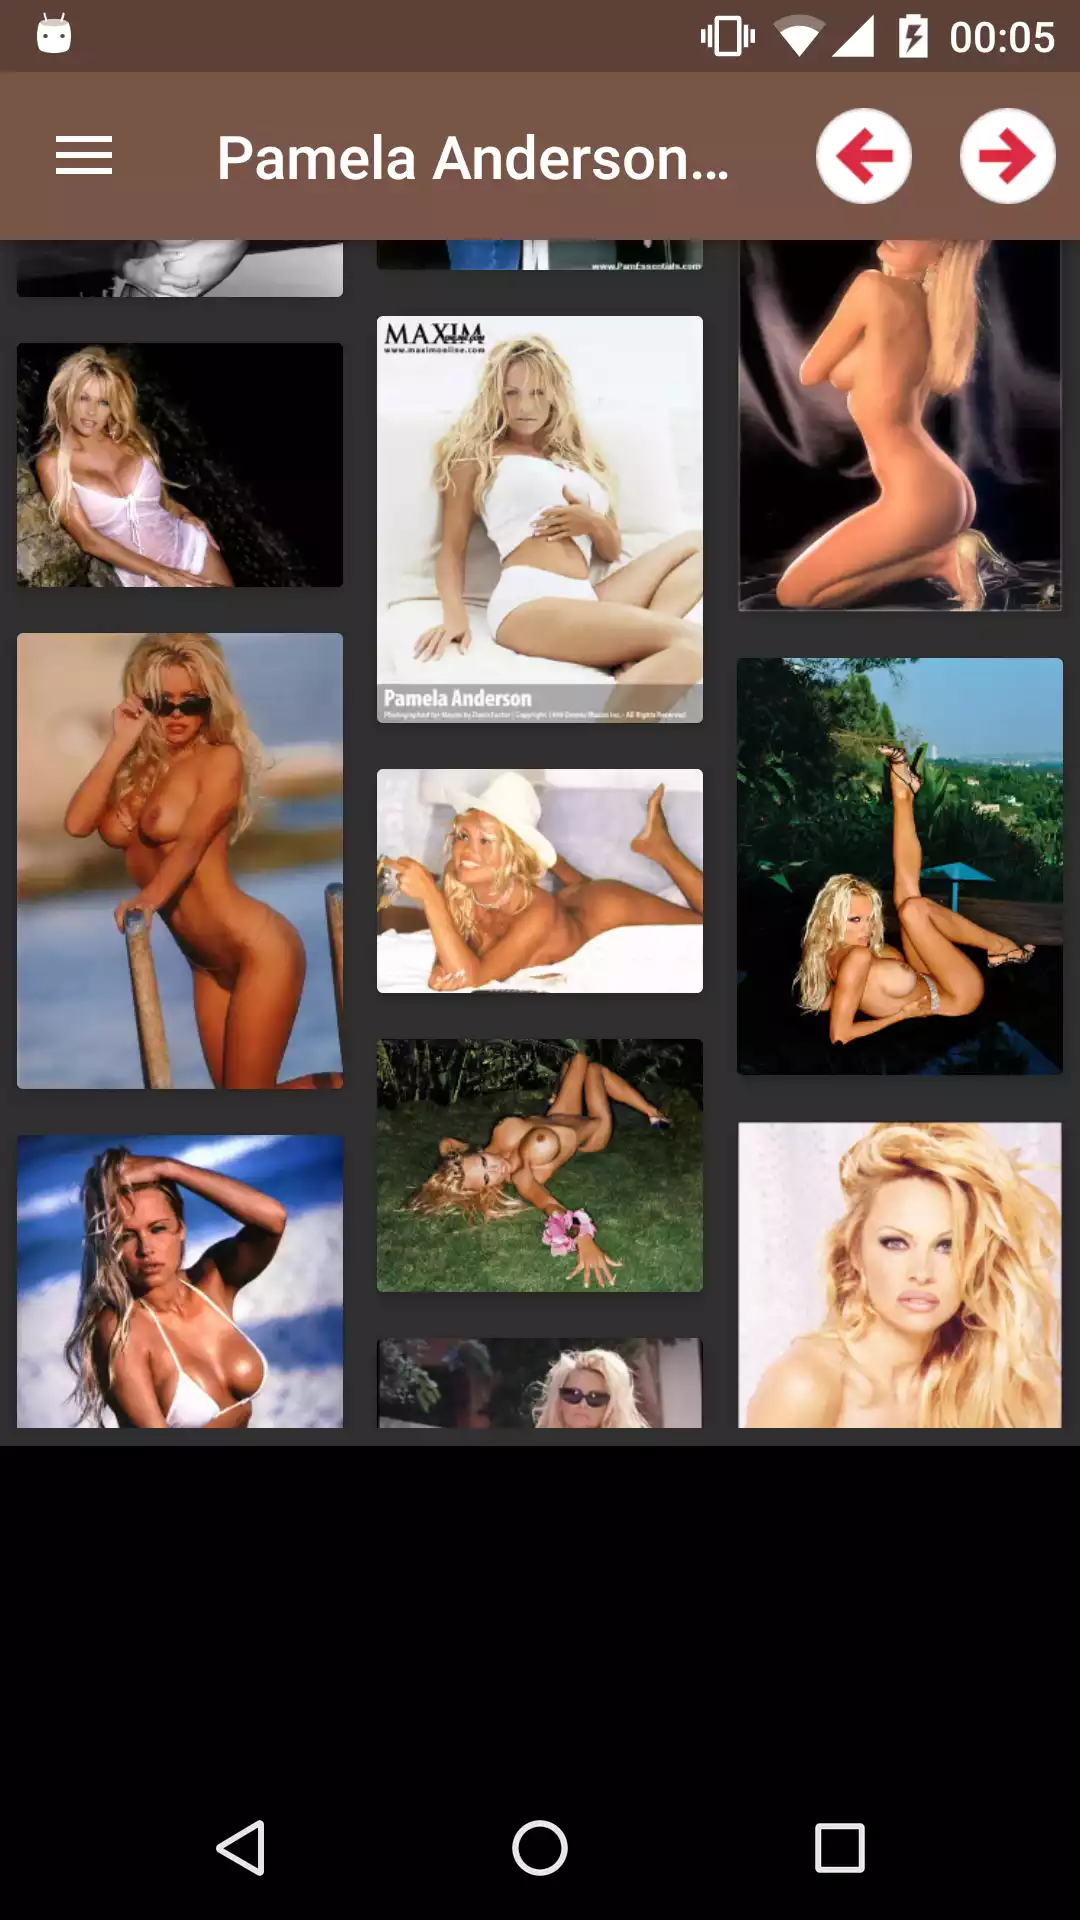 Pamela Anderson backgrounds topless,pictures,sexy,erotic,pron,backgrounds,apk,galleries,sex,app,porn,apps,best,pornstar,store,lovely,gallery,wallpapers,pics,photos,hentsi,hentai,wallpaper,anderson,hntai,pamela